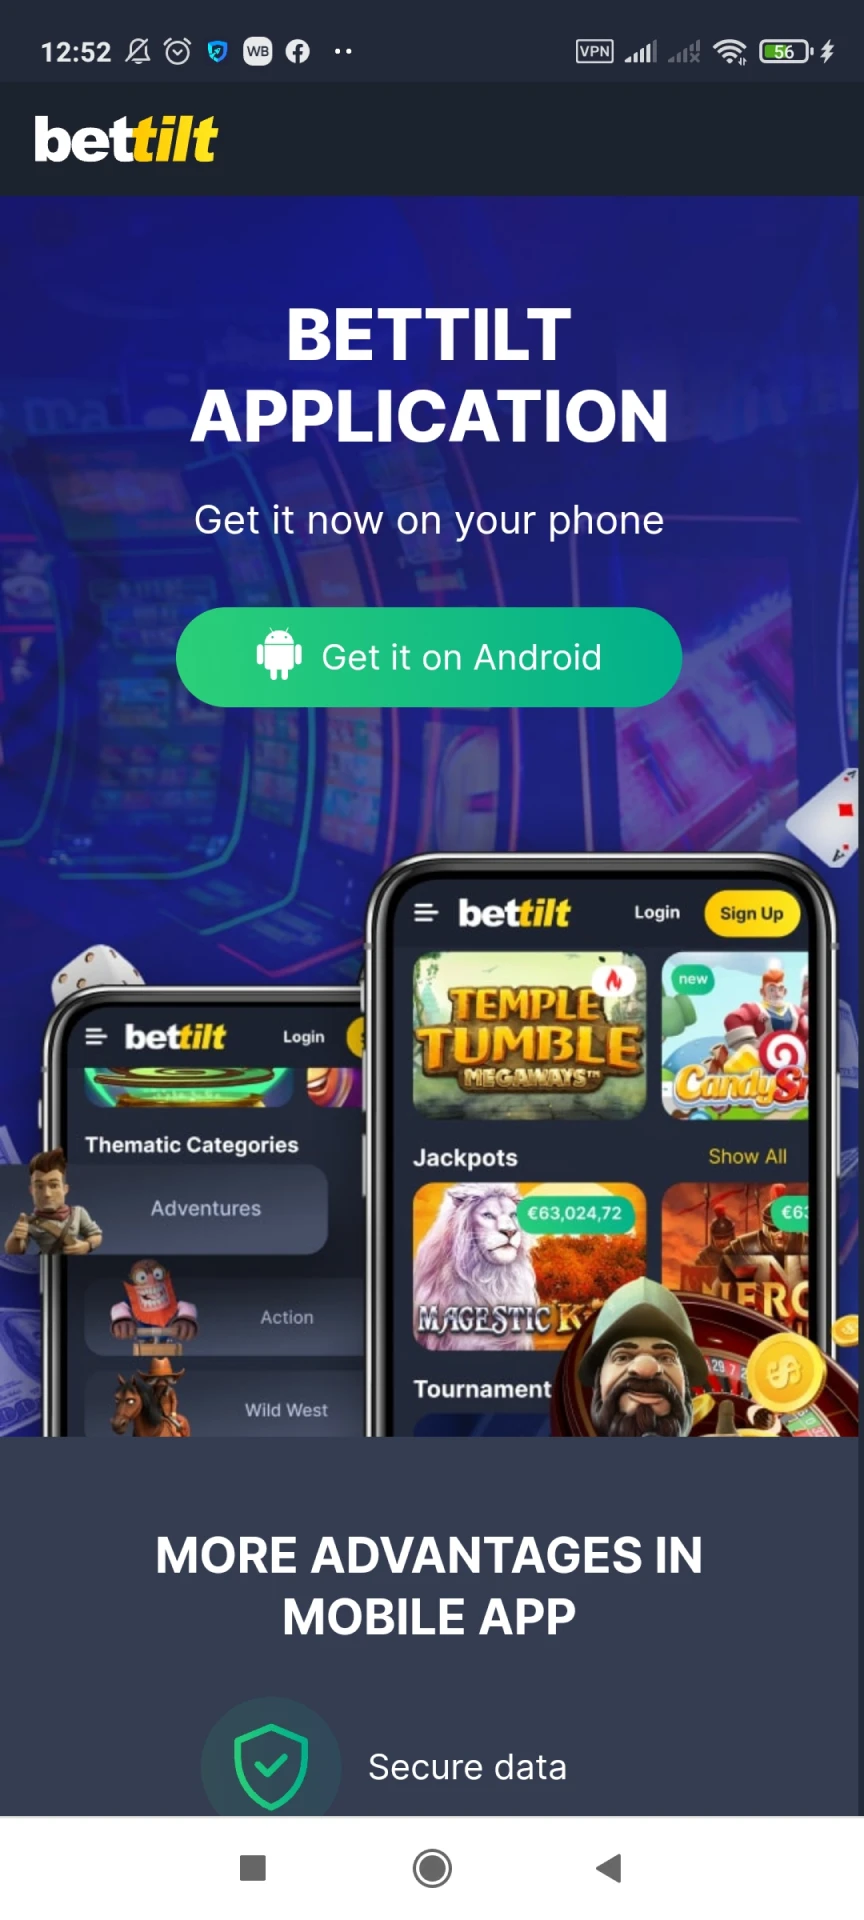 You need to start downloading the Bettilt app for Android.